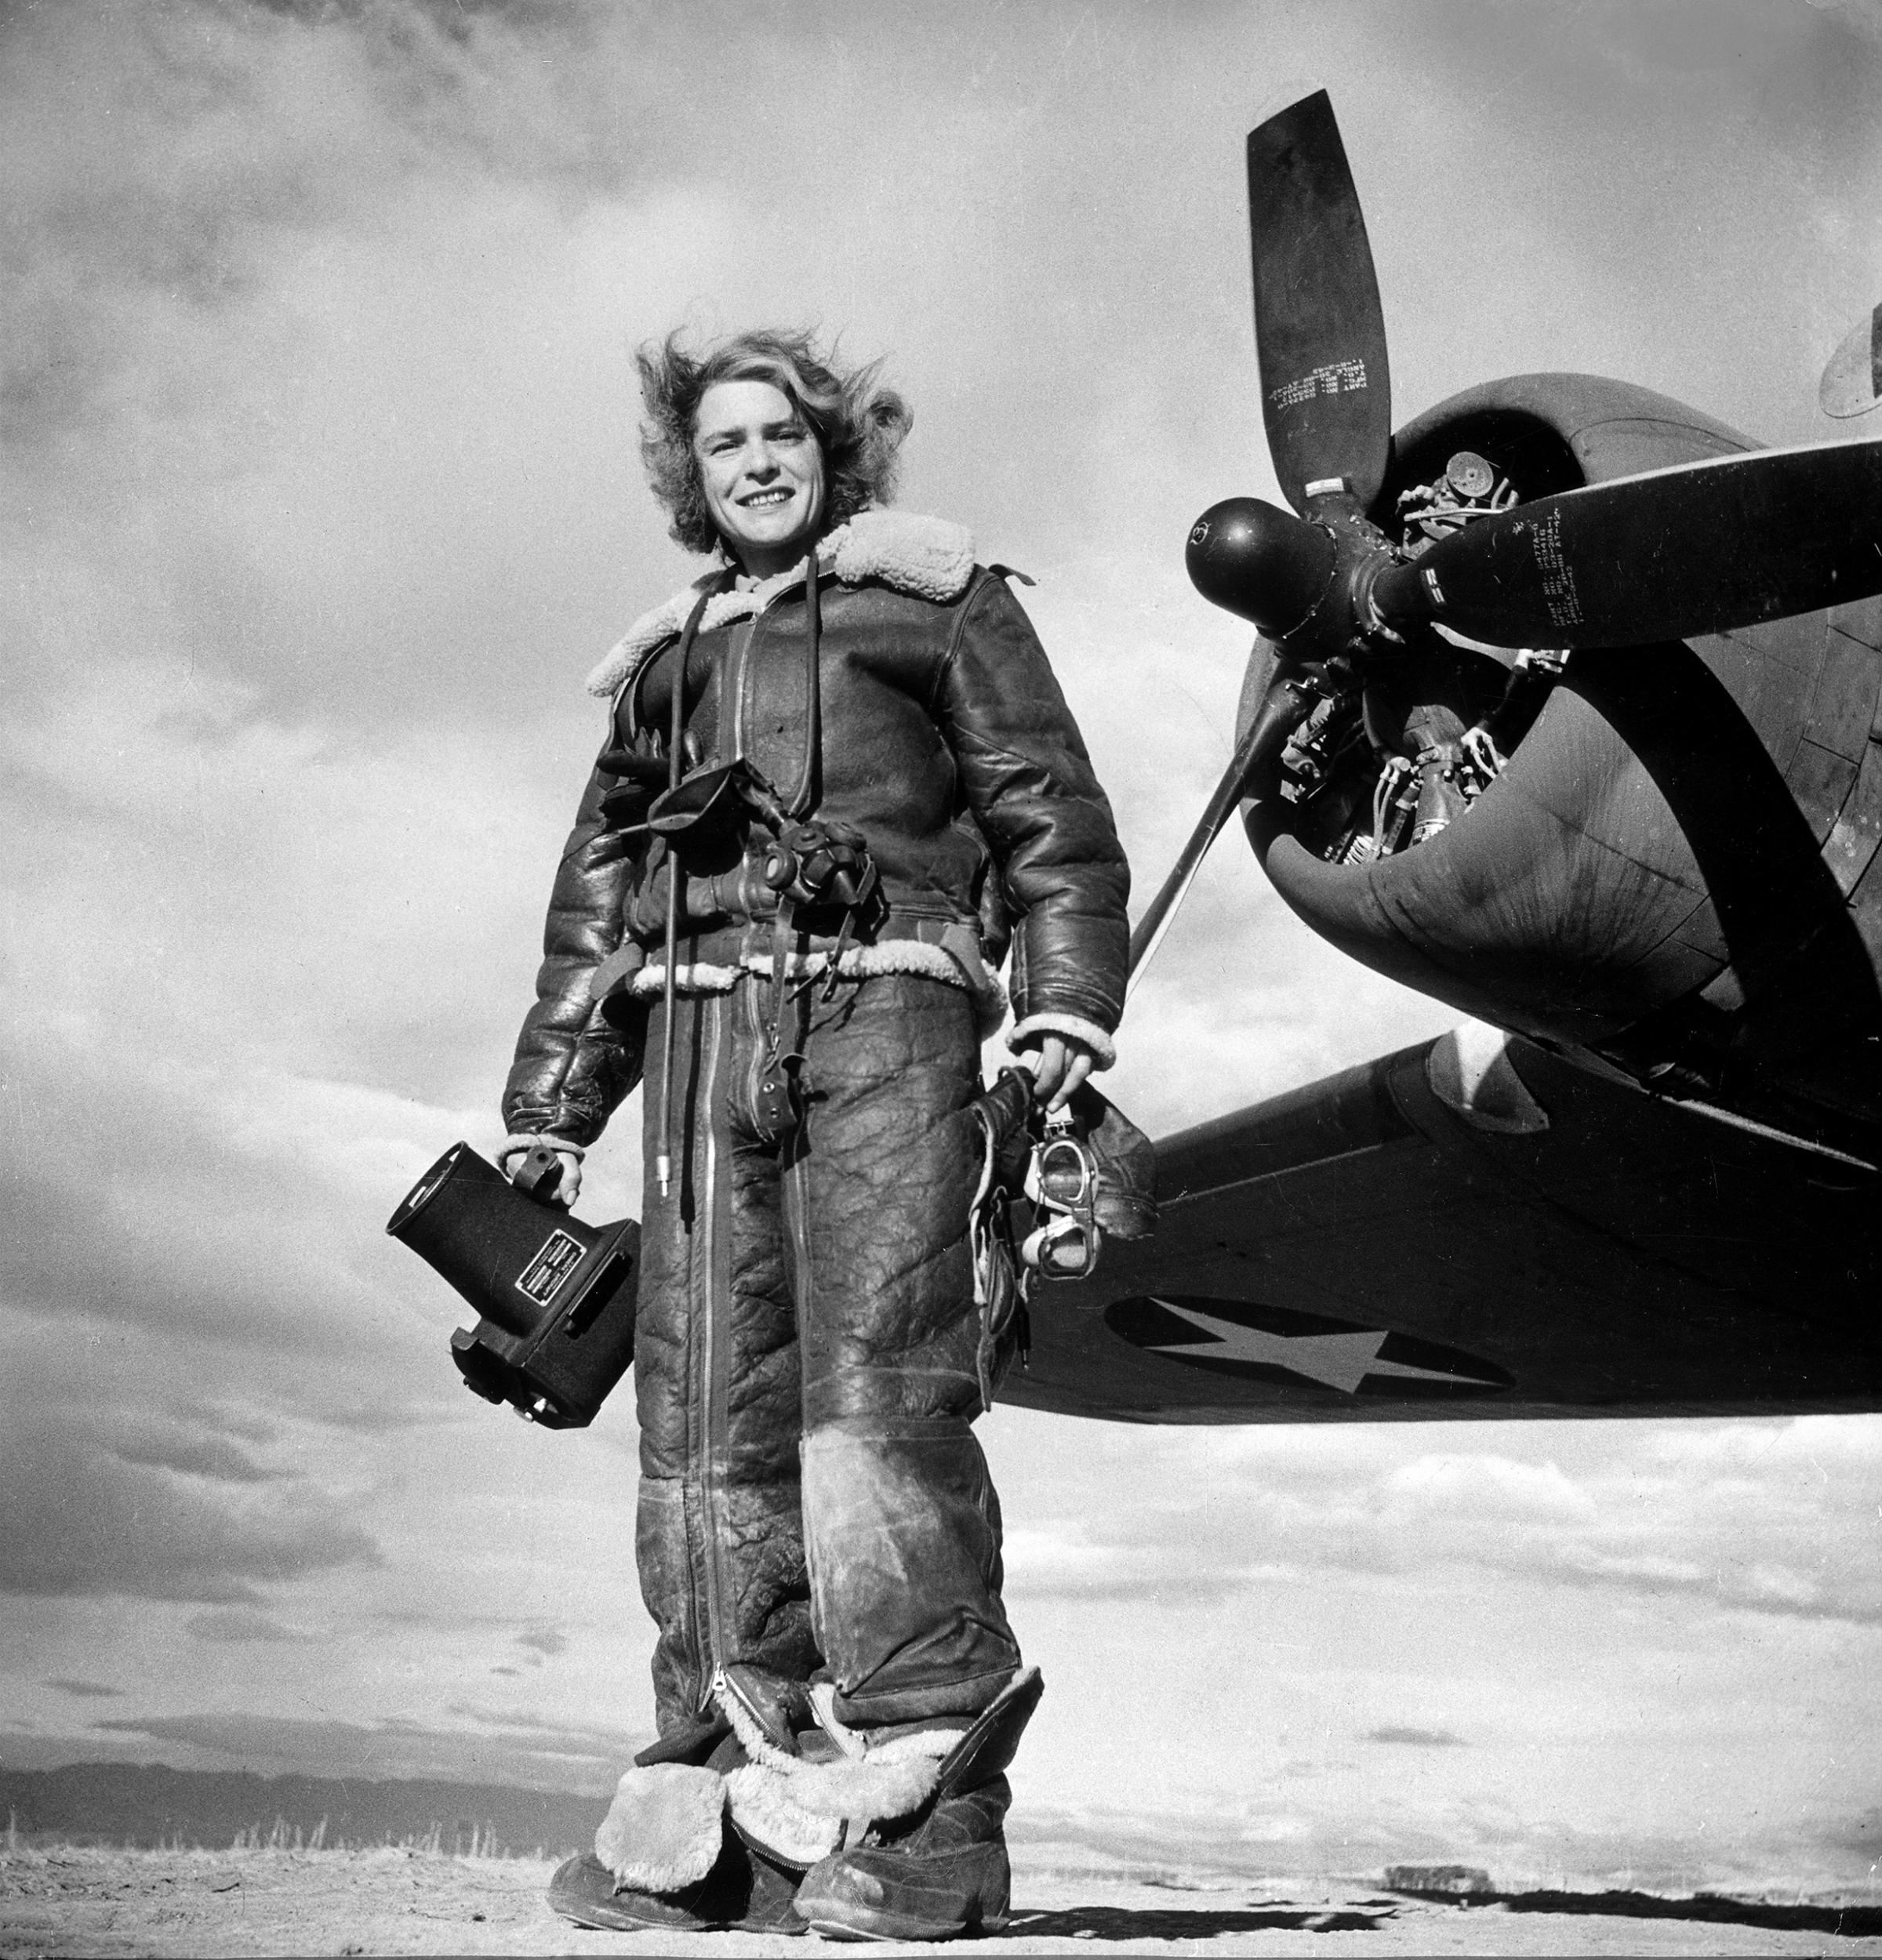 LIFE photographer Margaret Bourke-White clad in fleece flight suit while holding aerial camera, standing in front of Flying Fortress bomber in which she made combat mission photographs of the US attack on Tunis, 1943.